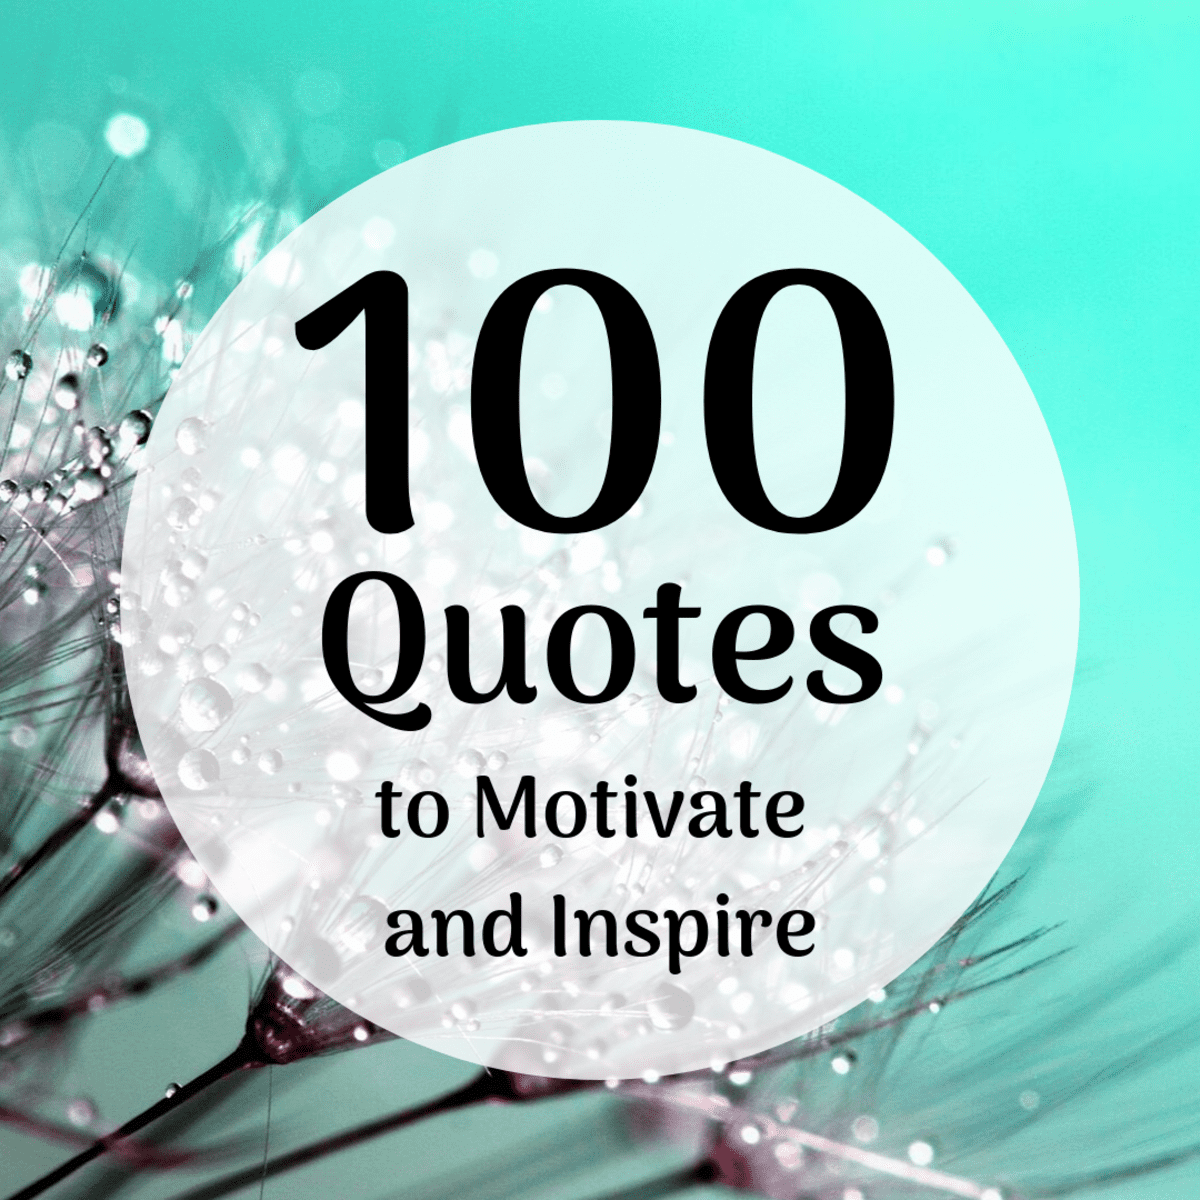 50+ if you can't make time for me quotes to uplift and inspire you 